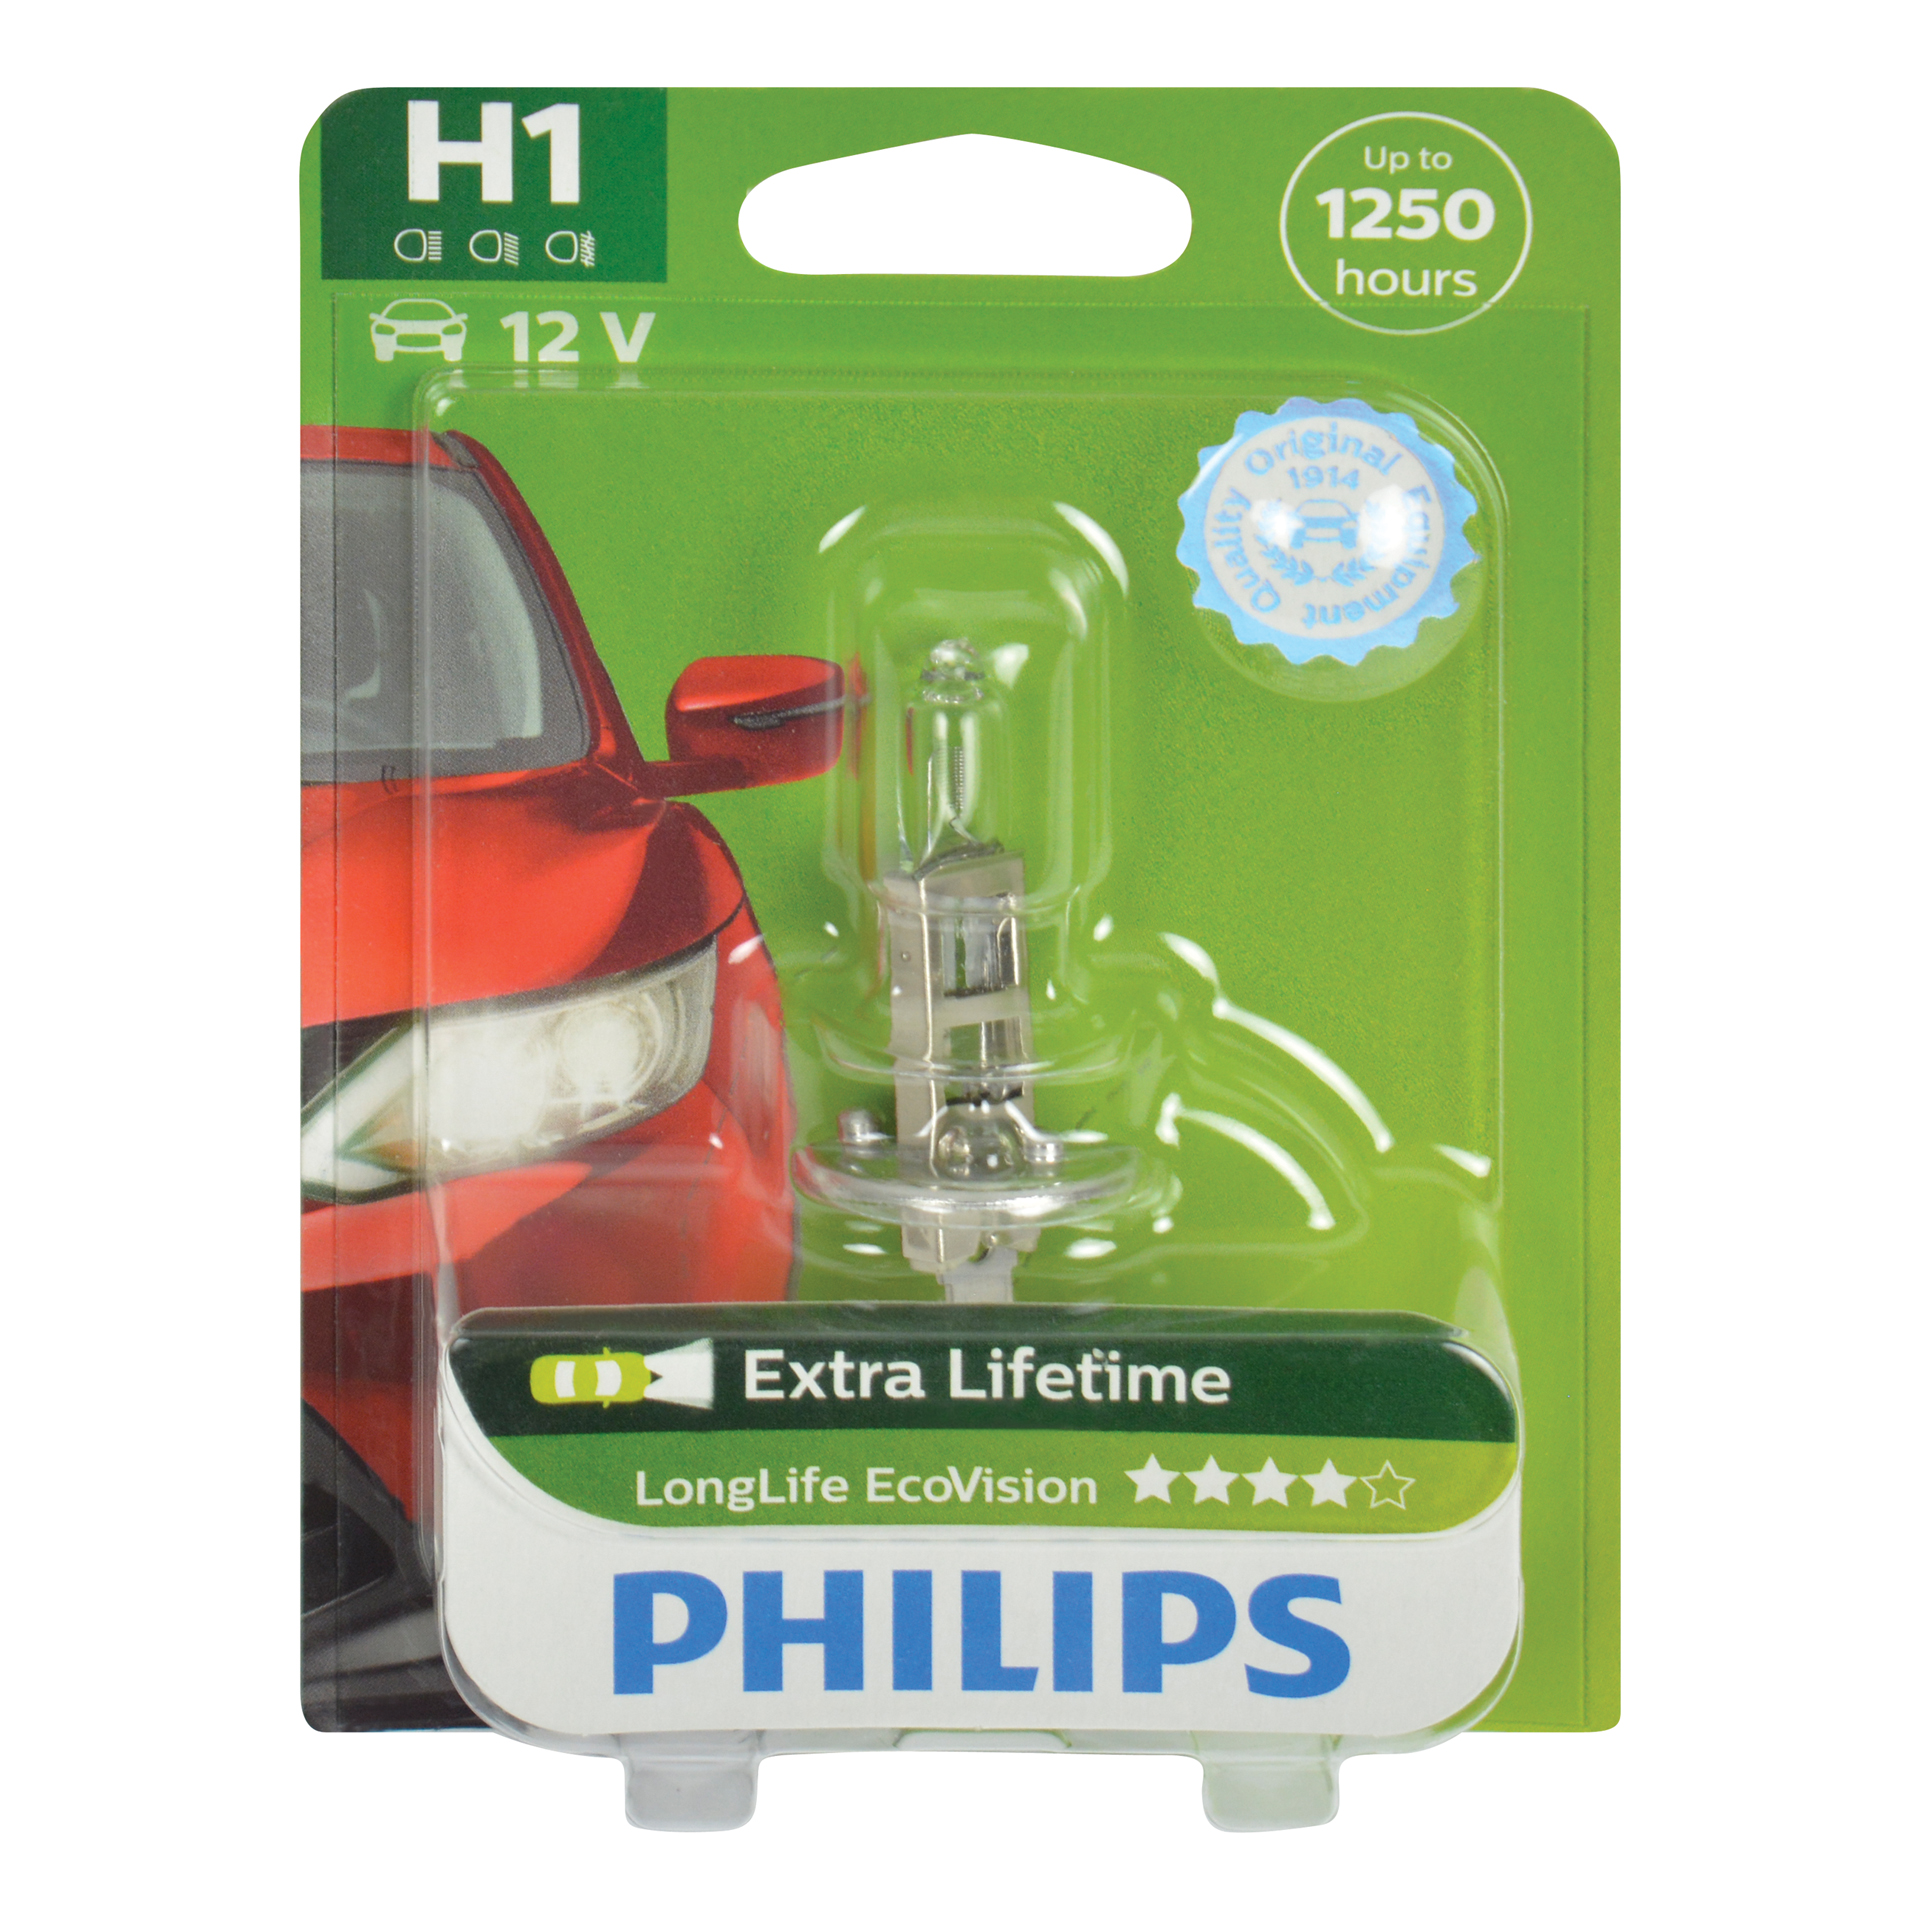 Philips Philips 12258LLECOB1 H1 EcoVision 55W blister 0730516